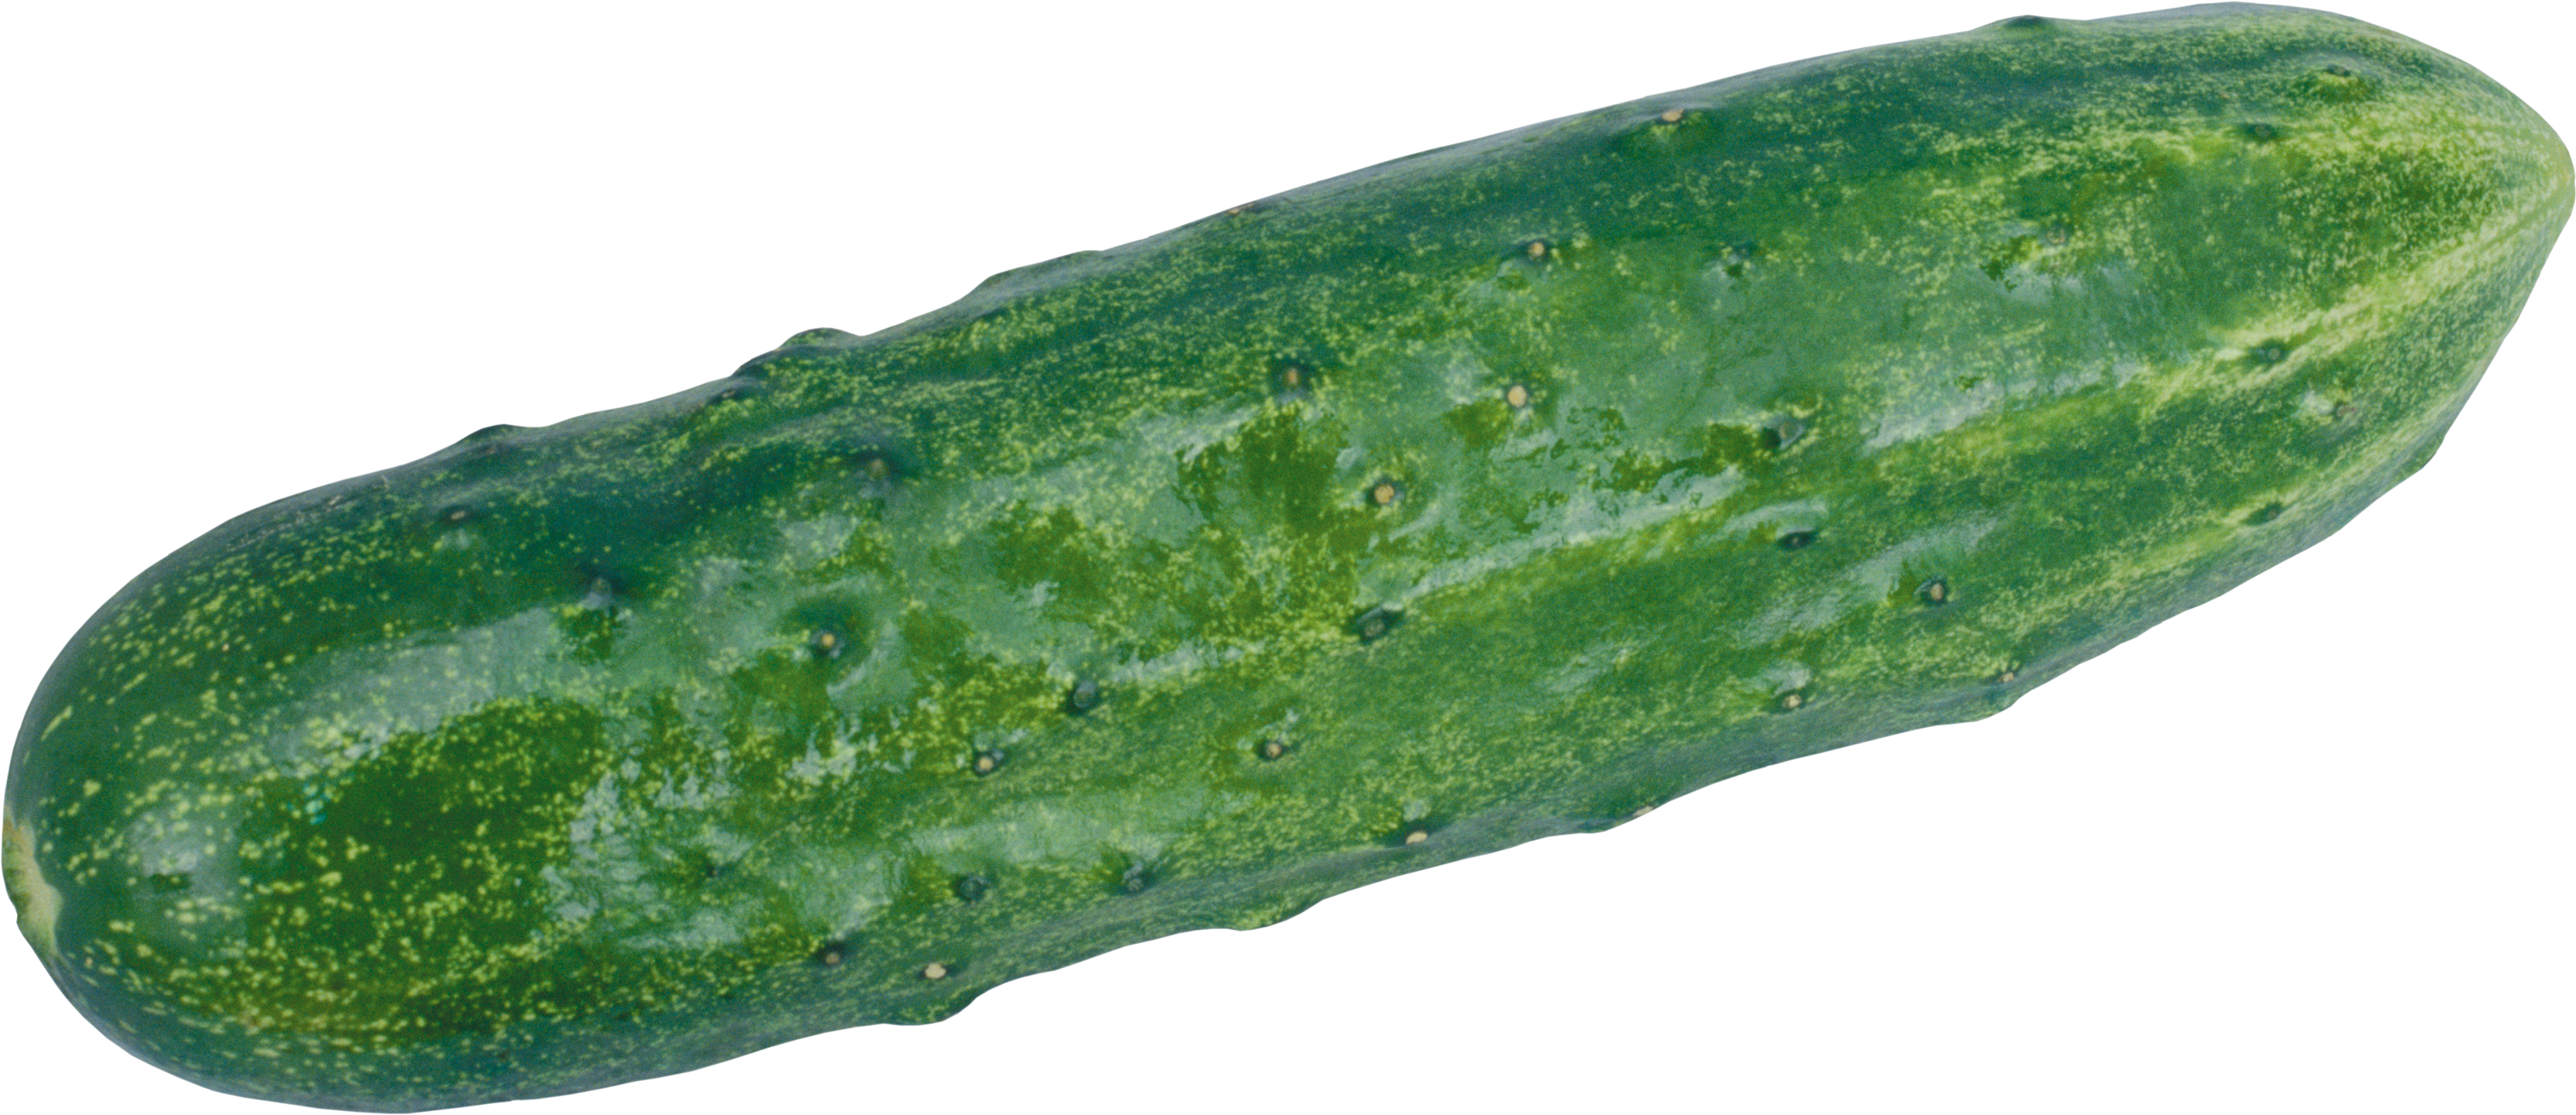 HQ Cucumber Wallpapers | File 5643.27Kb